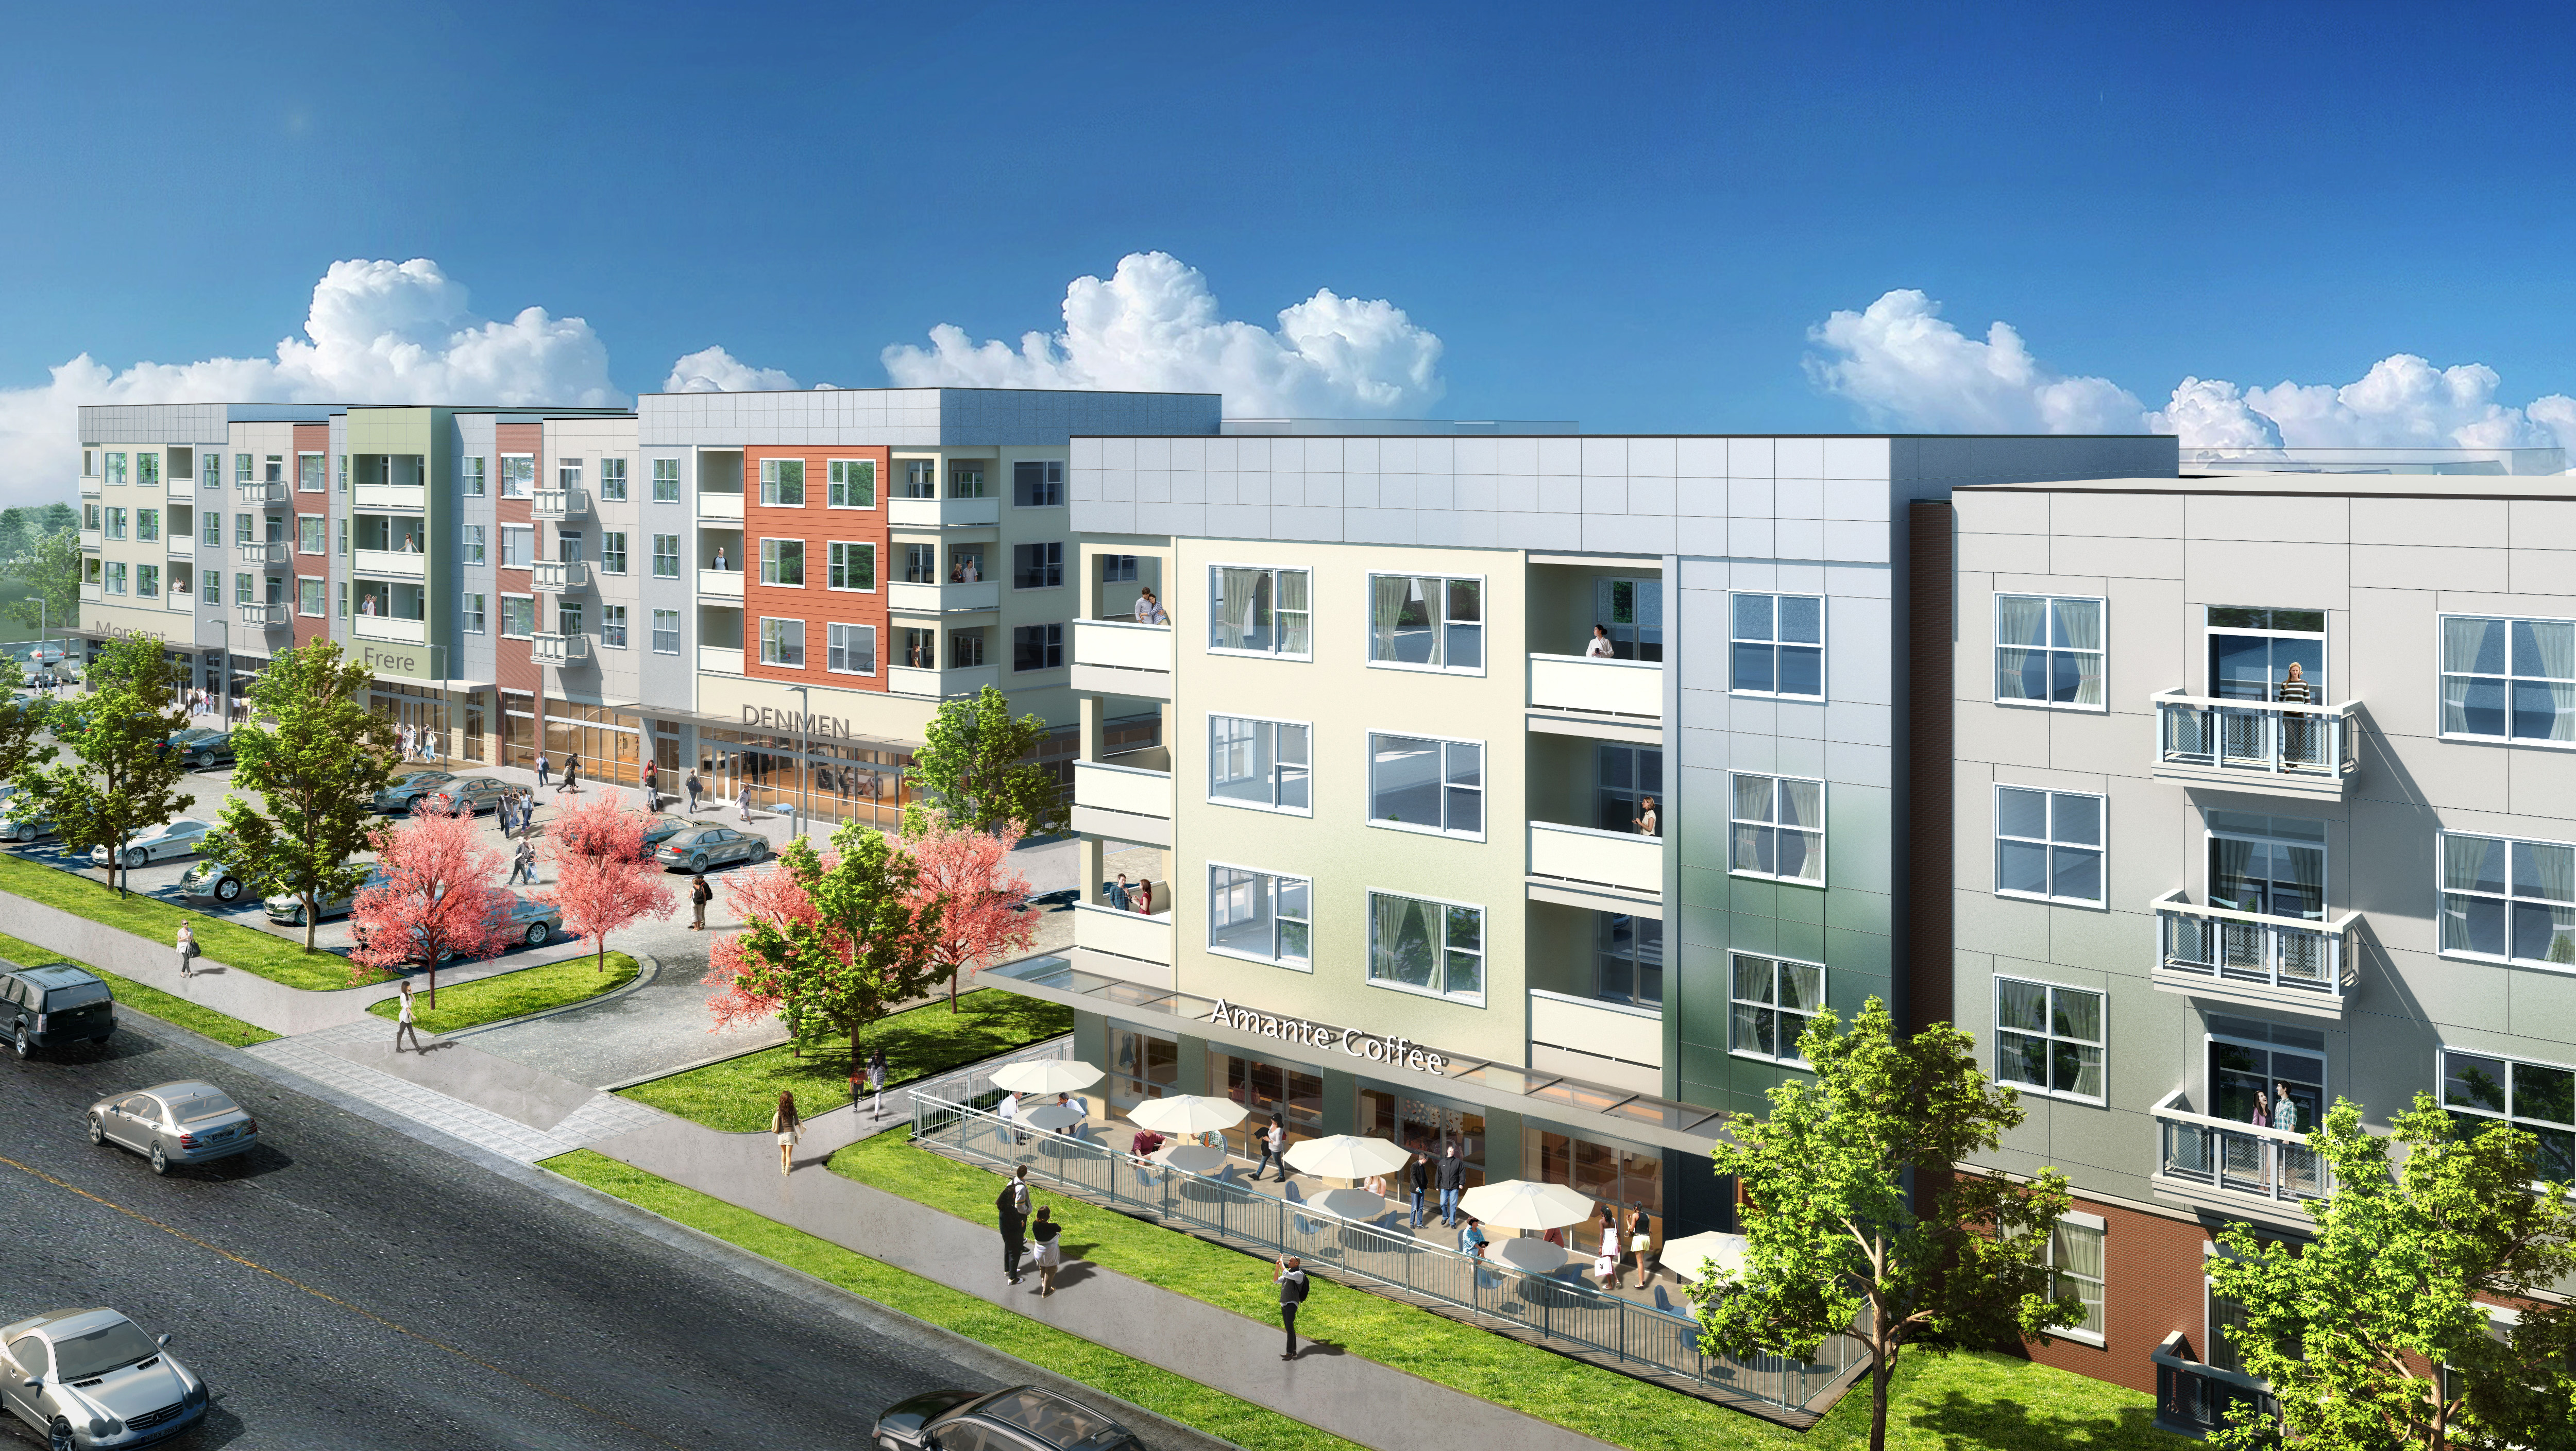 Existing Lifestyle Centers Thrive, but Developers Prefer Mixed-Use for New  Projects